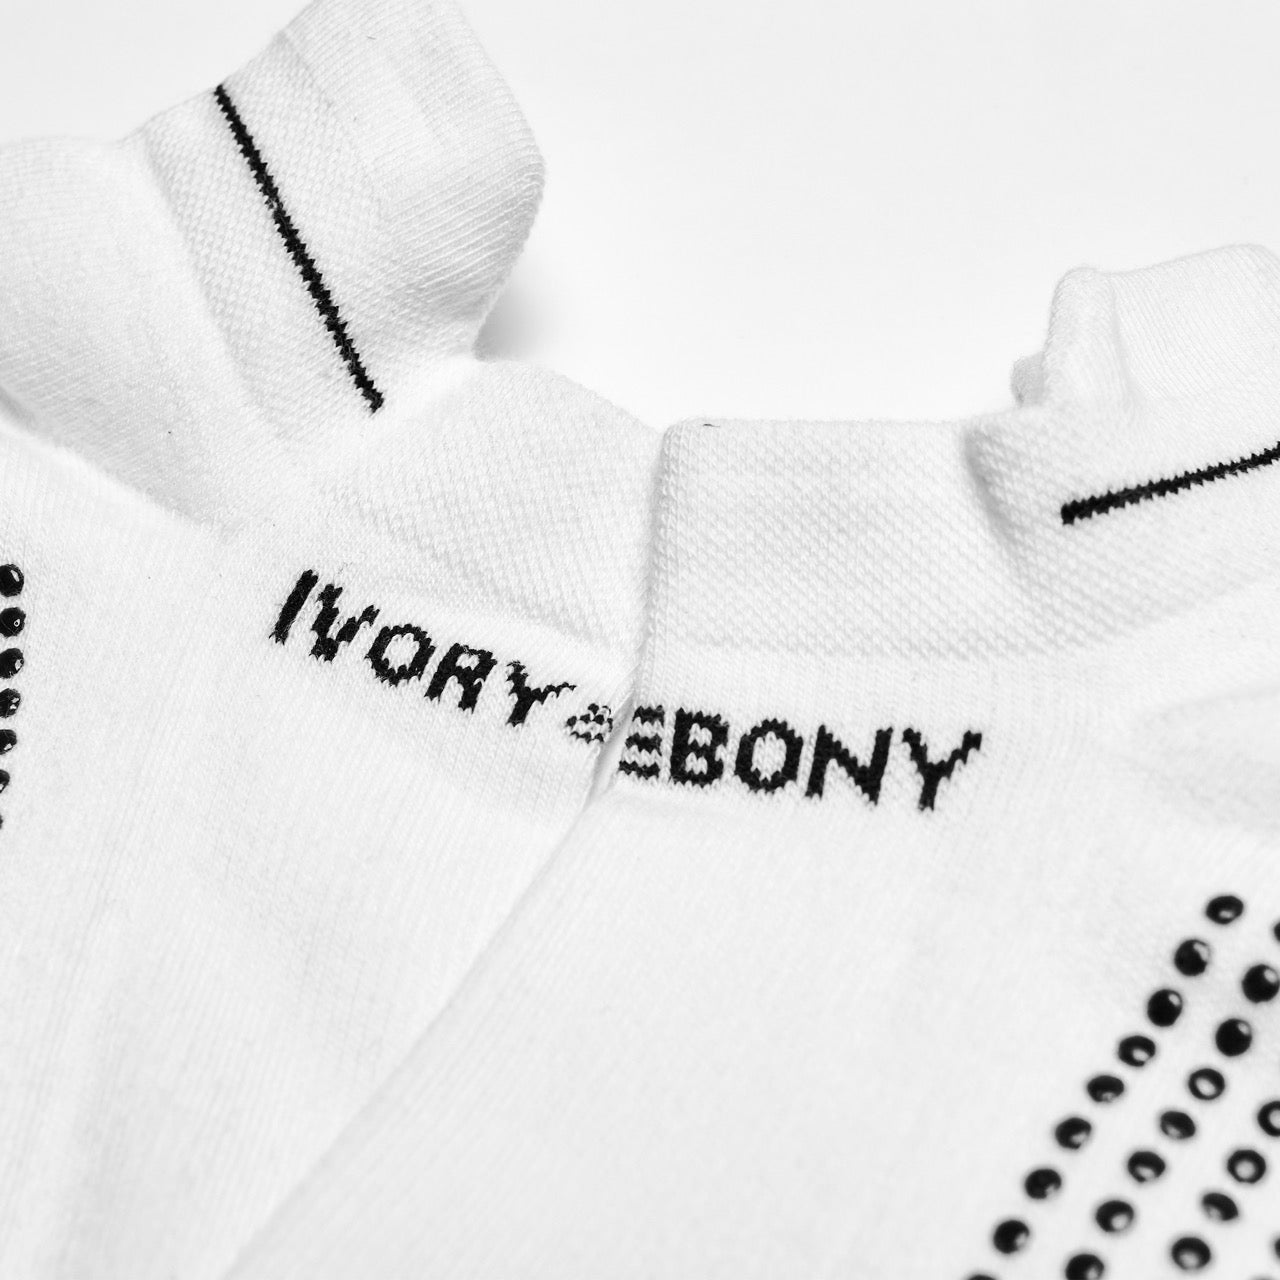 Shop Our Anti-Slip White Ankle Socks - Ivory & Ebony Collection: Extra-Long Staple Cotton, Cushioned Footbed, Blister Tab, Seamless Toe - Elevate Your Sock Game!